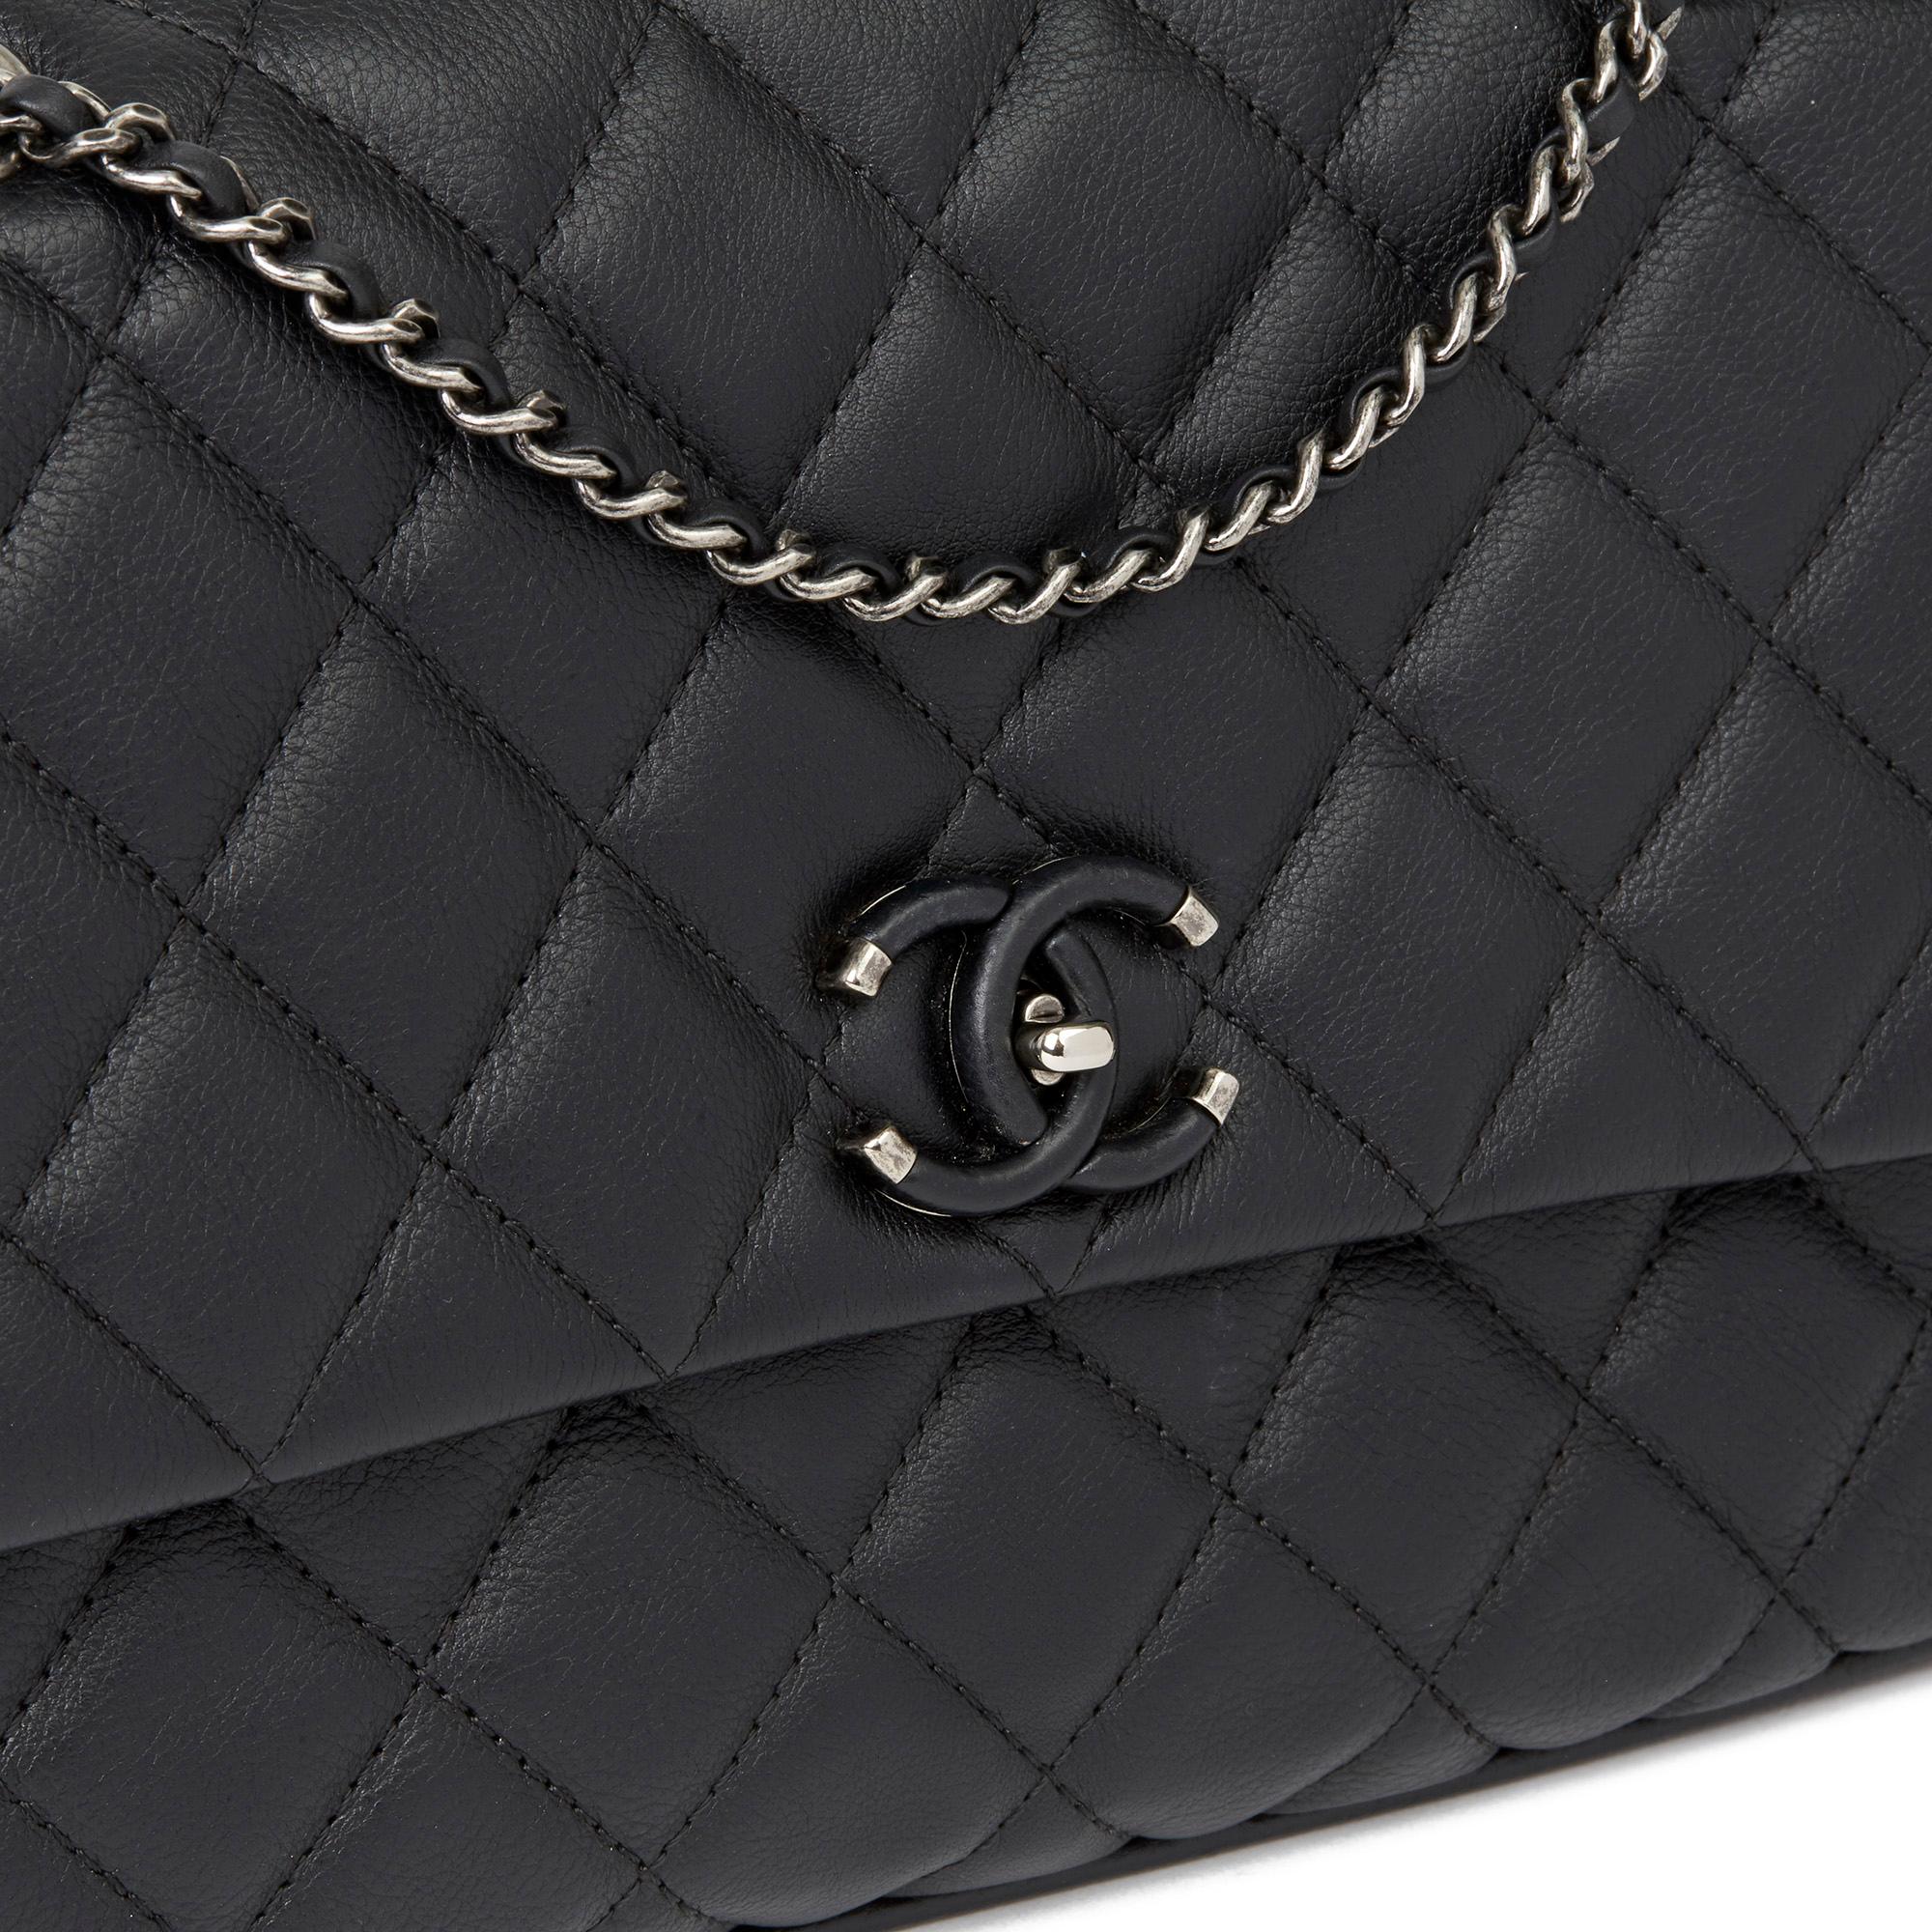 Women's 2017 Chanel Black Quilted Calfskin Leather Medium Frame in Chain Flap Bag